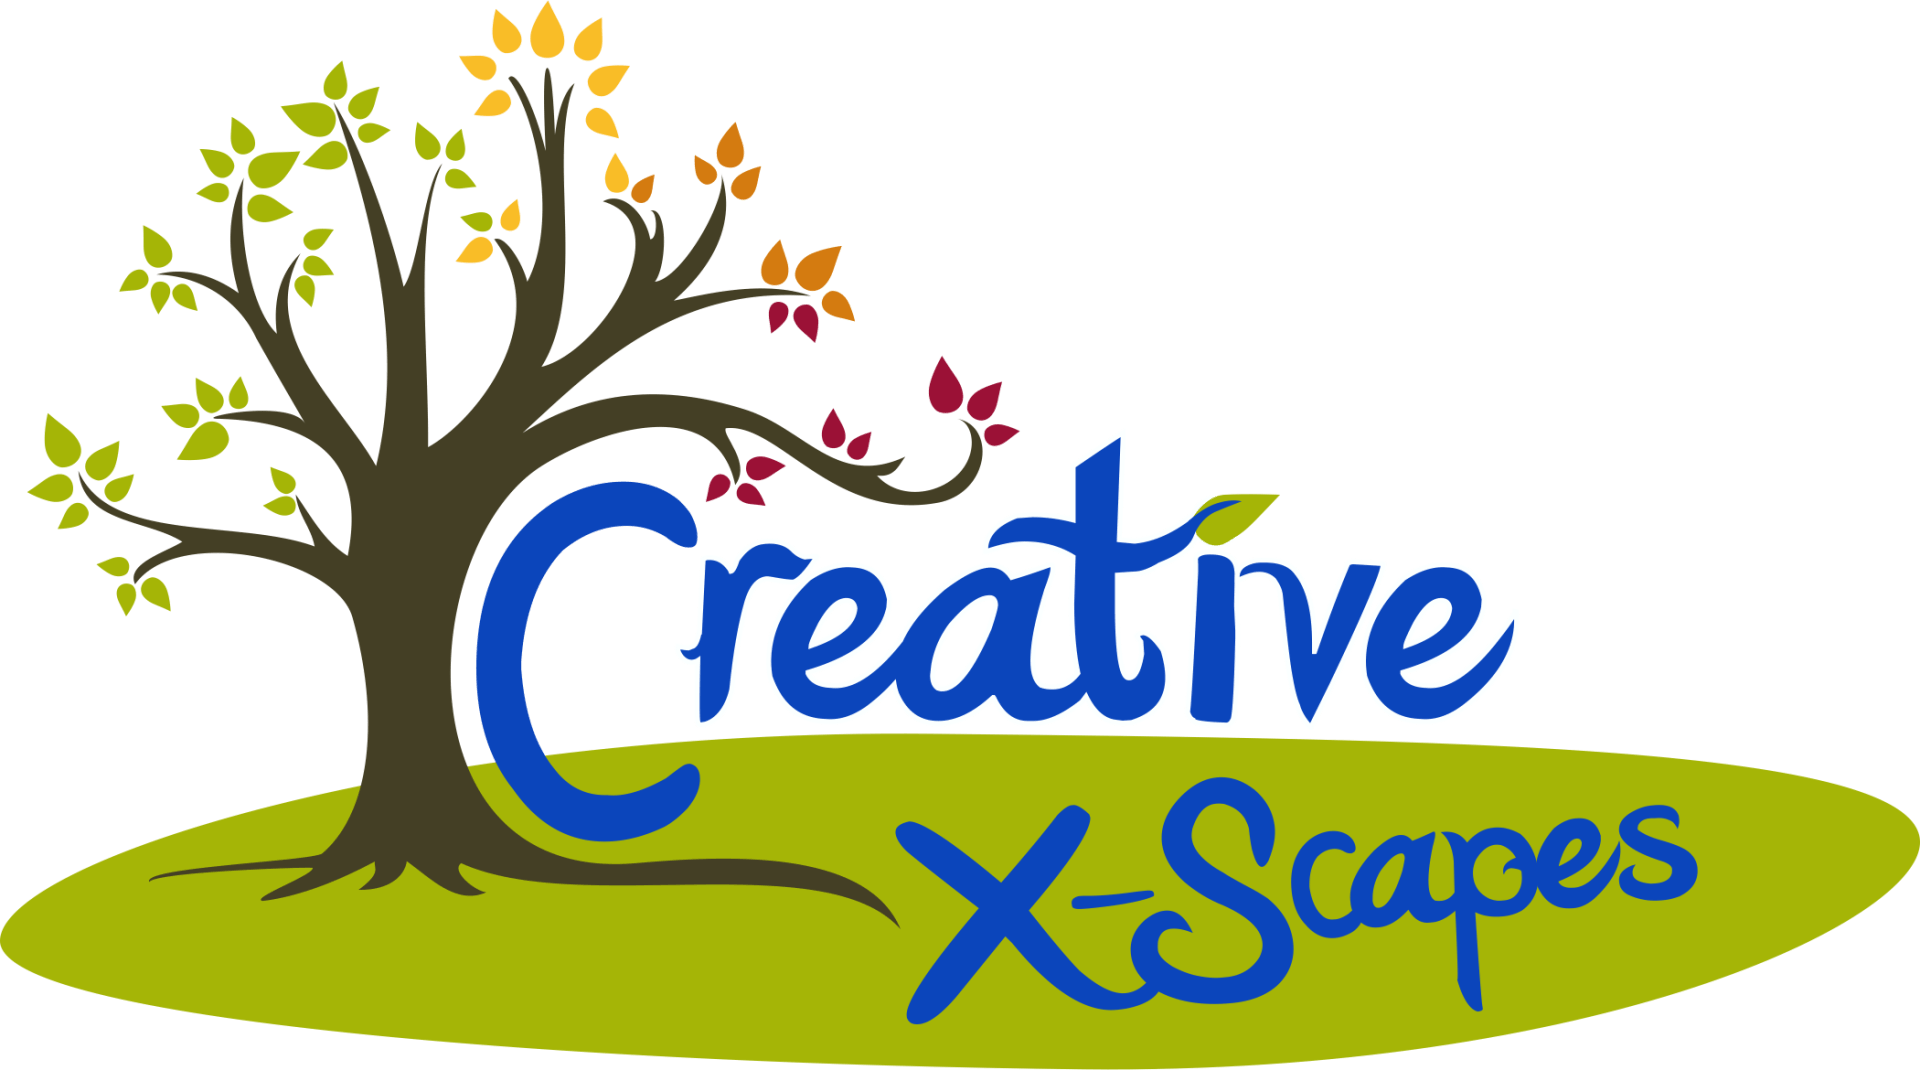 Landscaping Services Charleston Wv Creative X Scapes